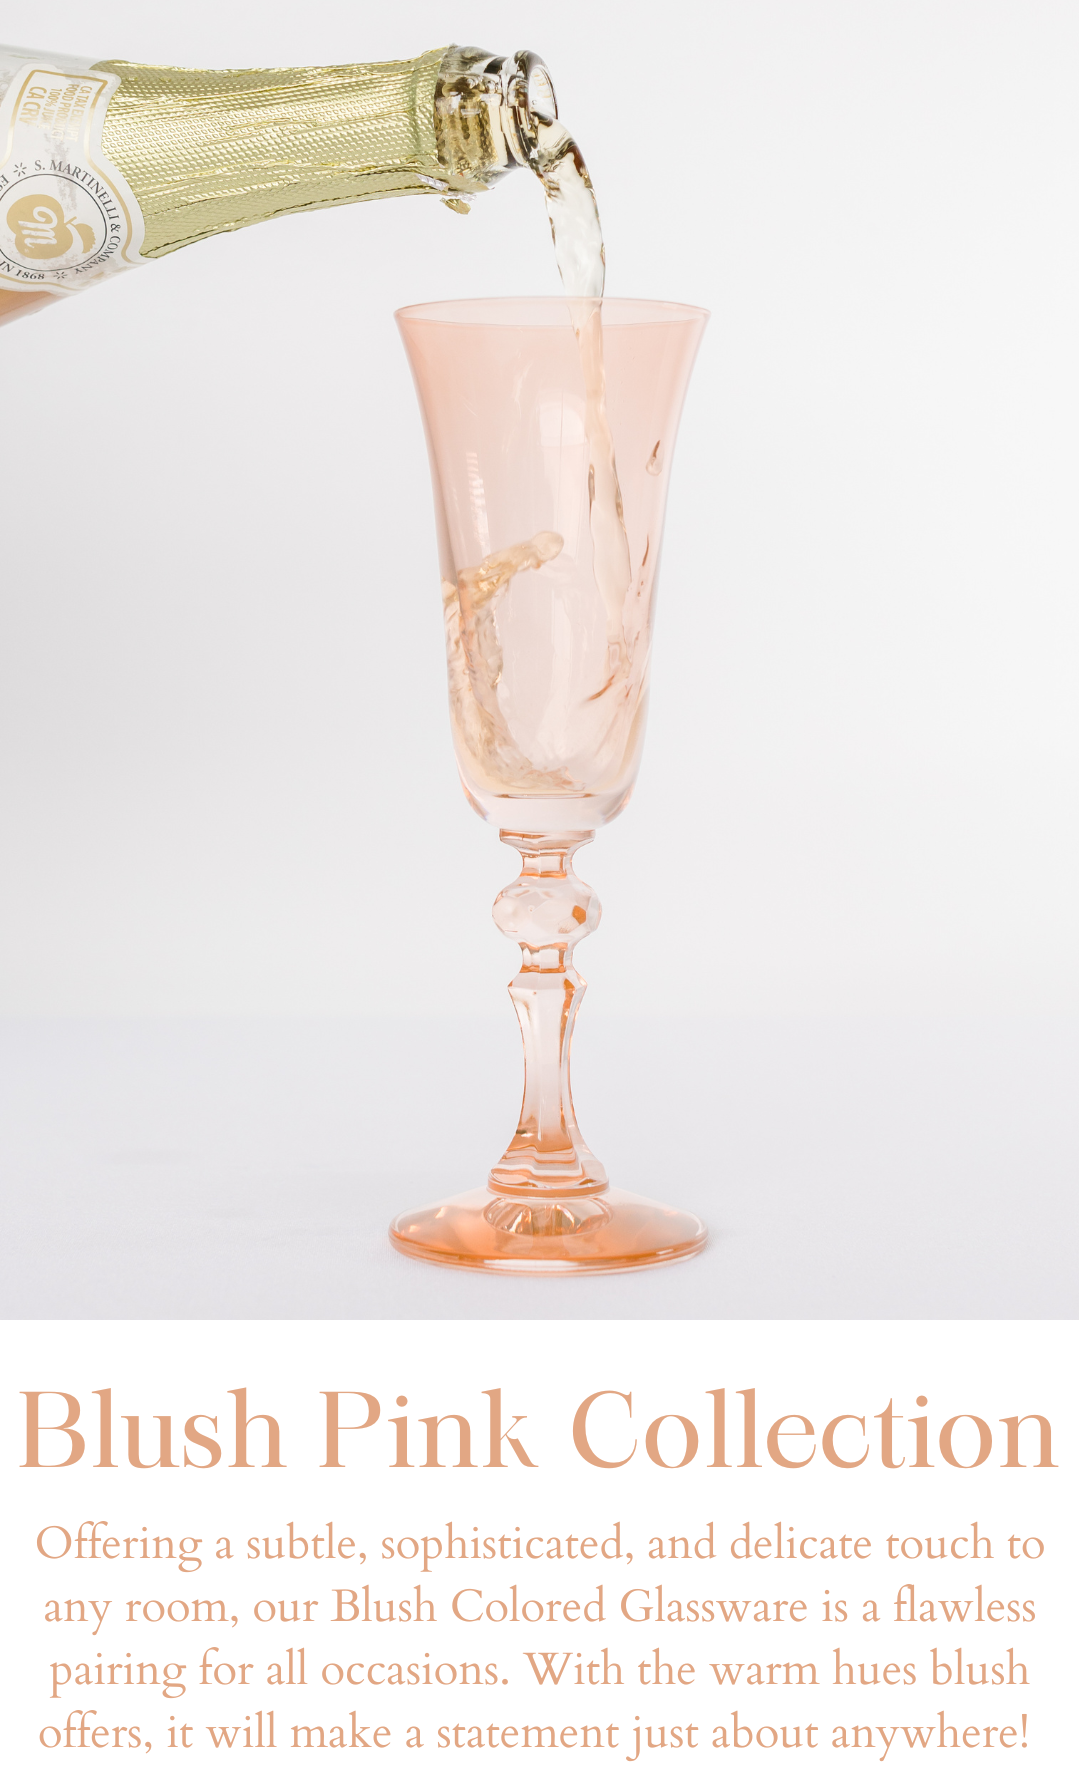 Blush Pink Collection + Giveaway